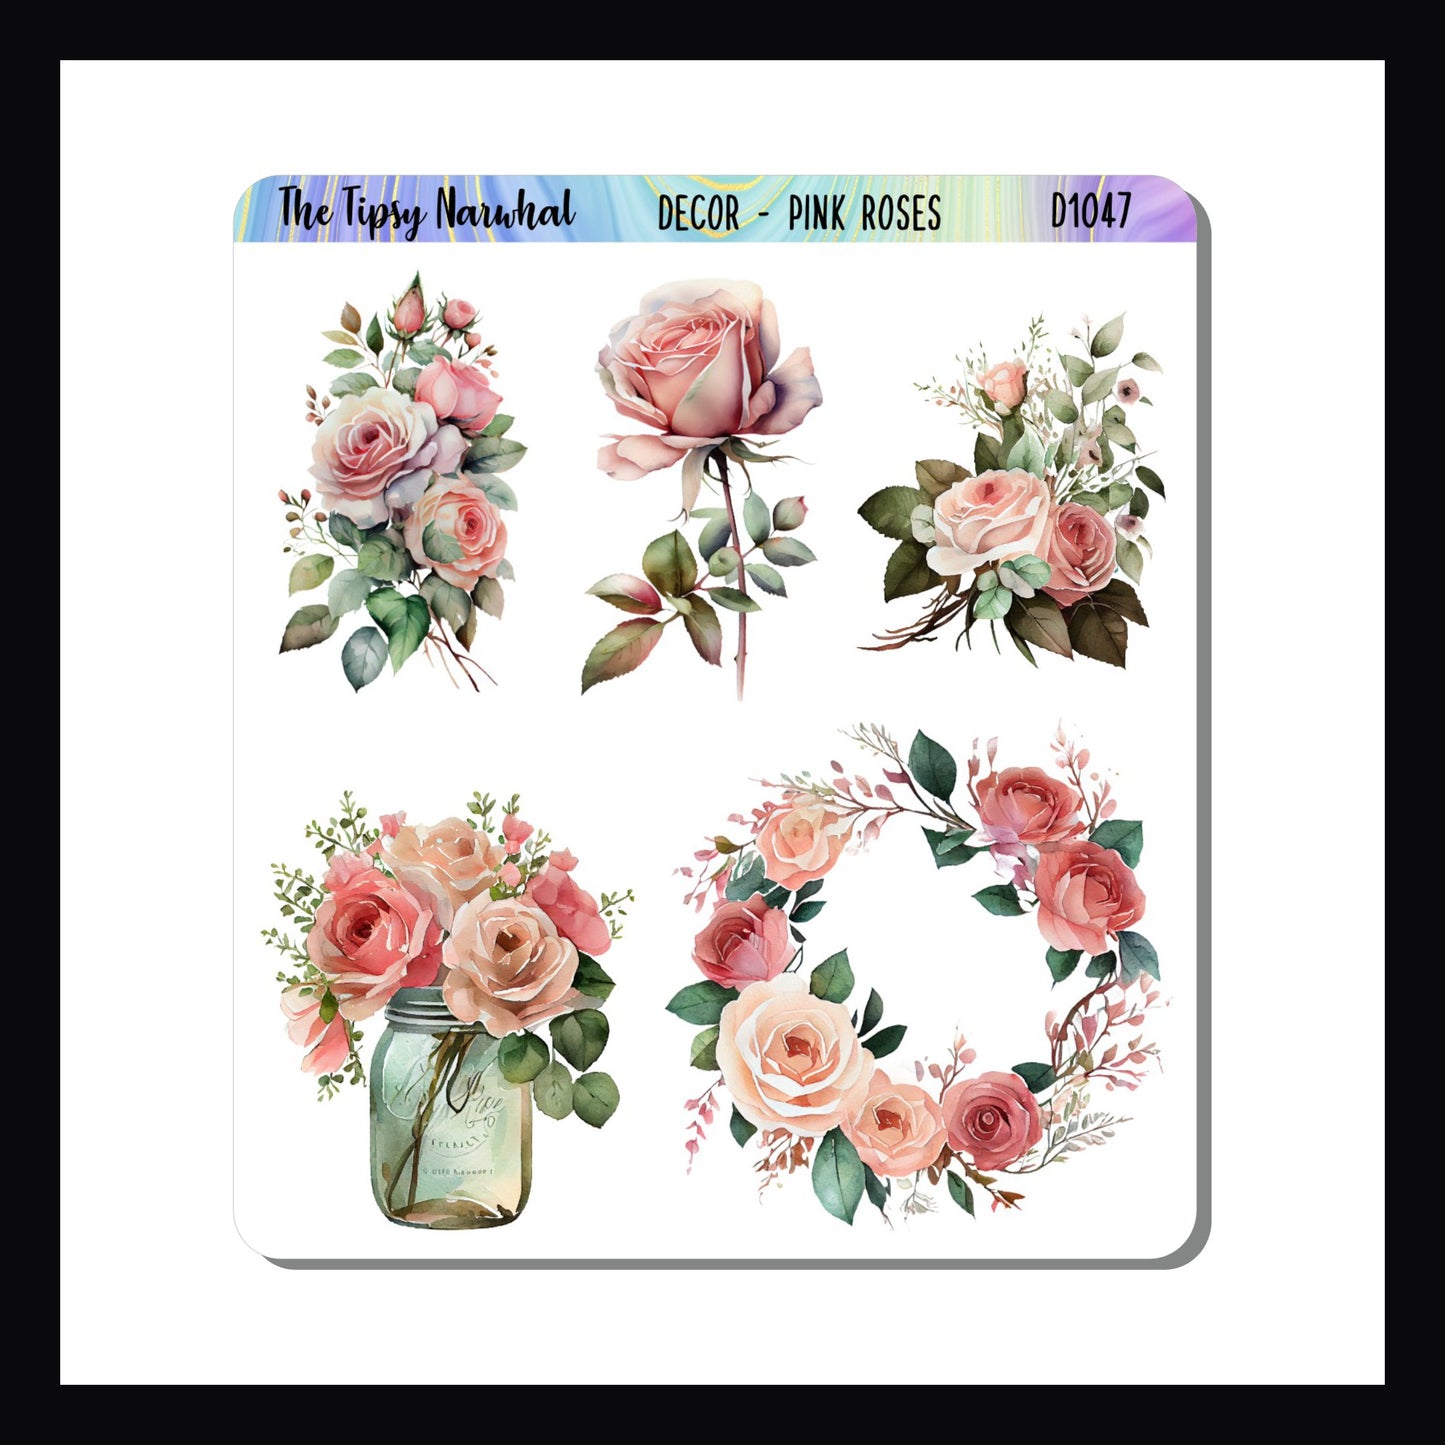 The Pink Roses Decor Sheet features 5 stickers of various sizes all depicting pink roses.  Includes a rose wreath, single rose stem, and bouquets.